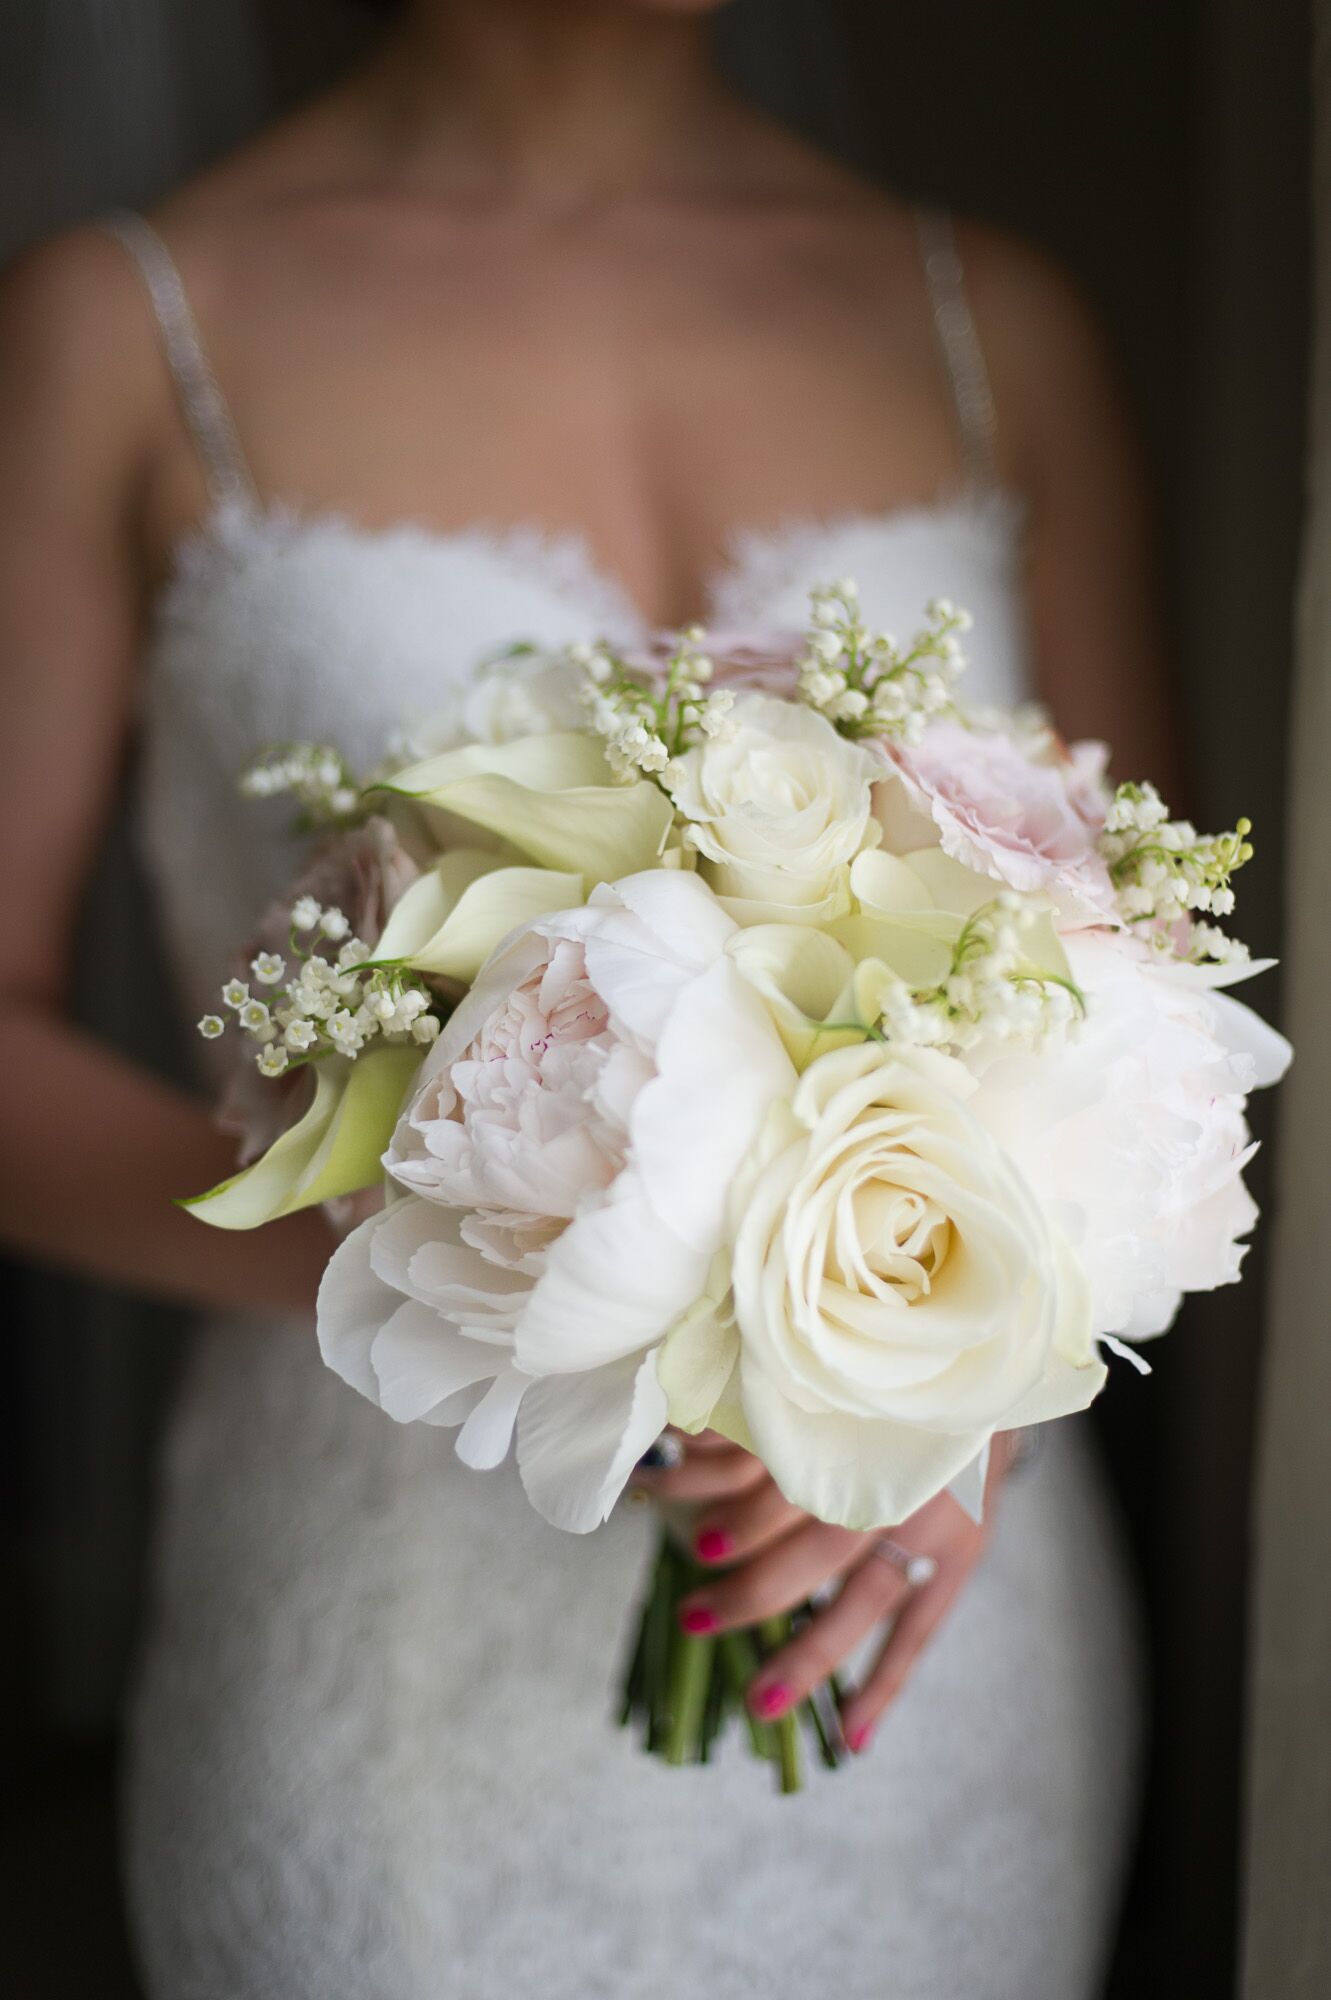 Simple Bouquet With Peonies Roses and Calla Lilies